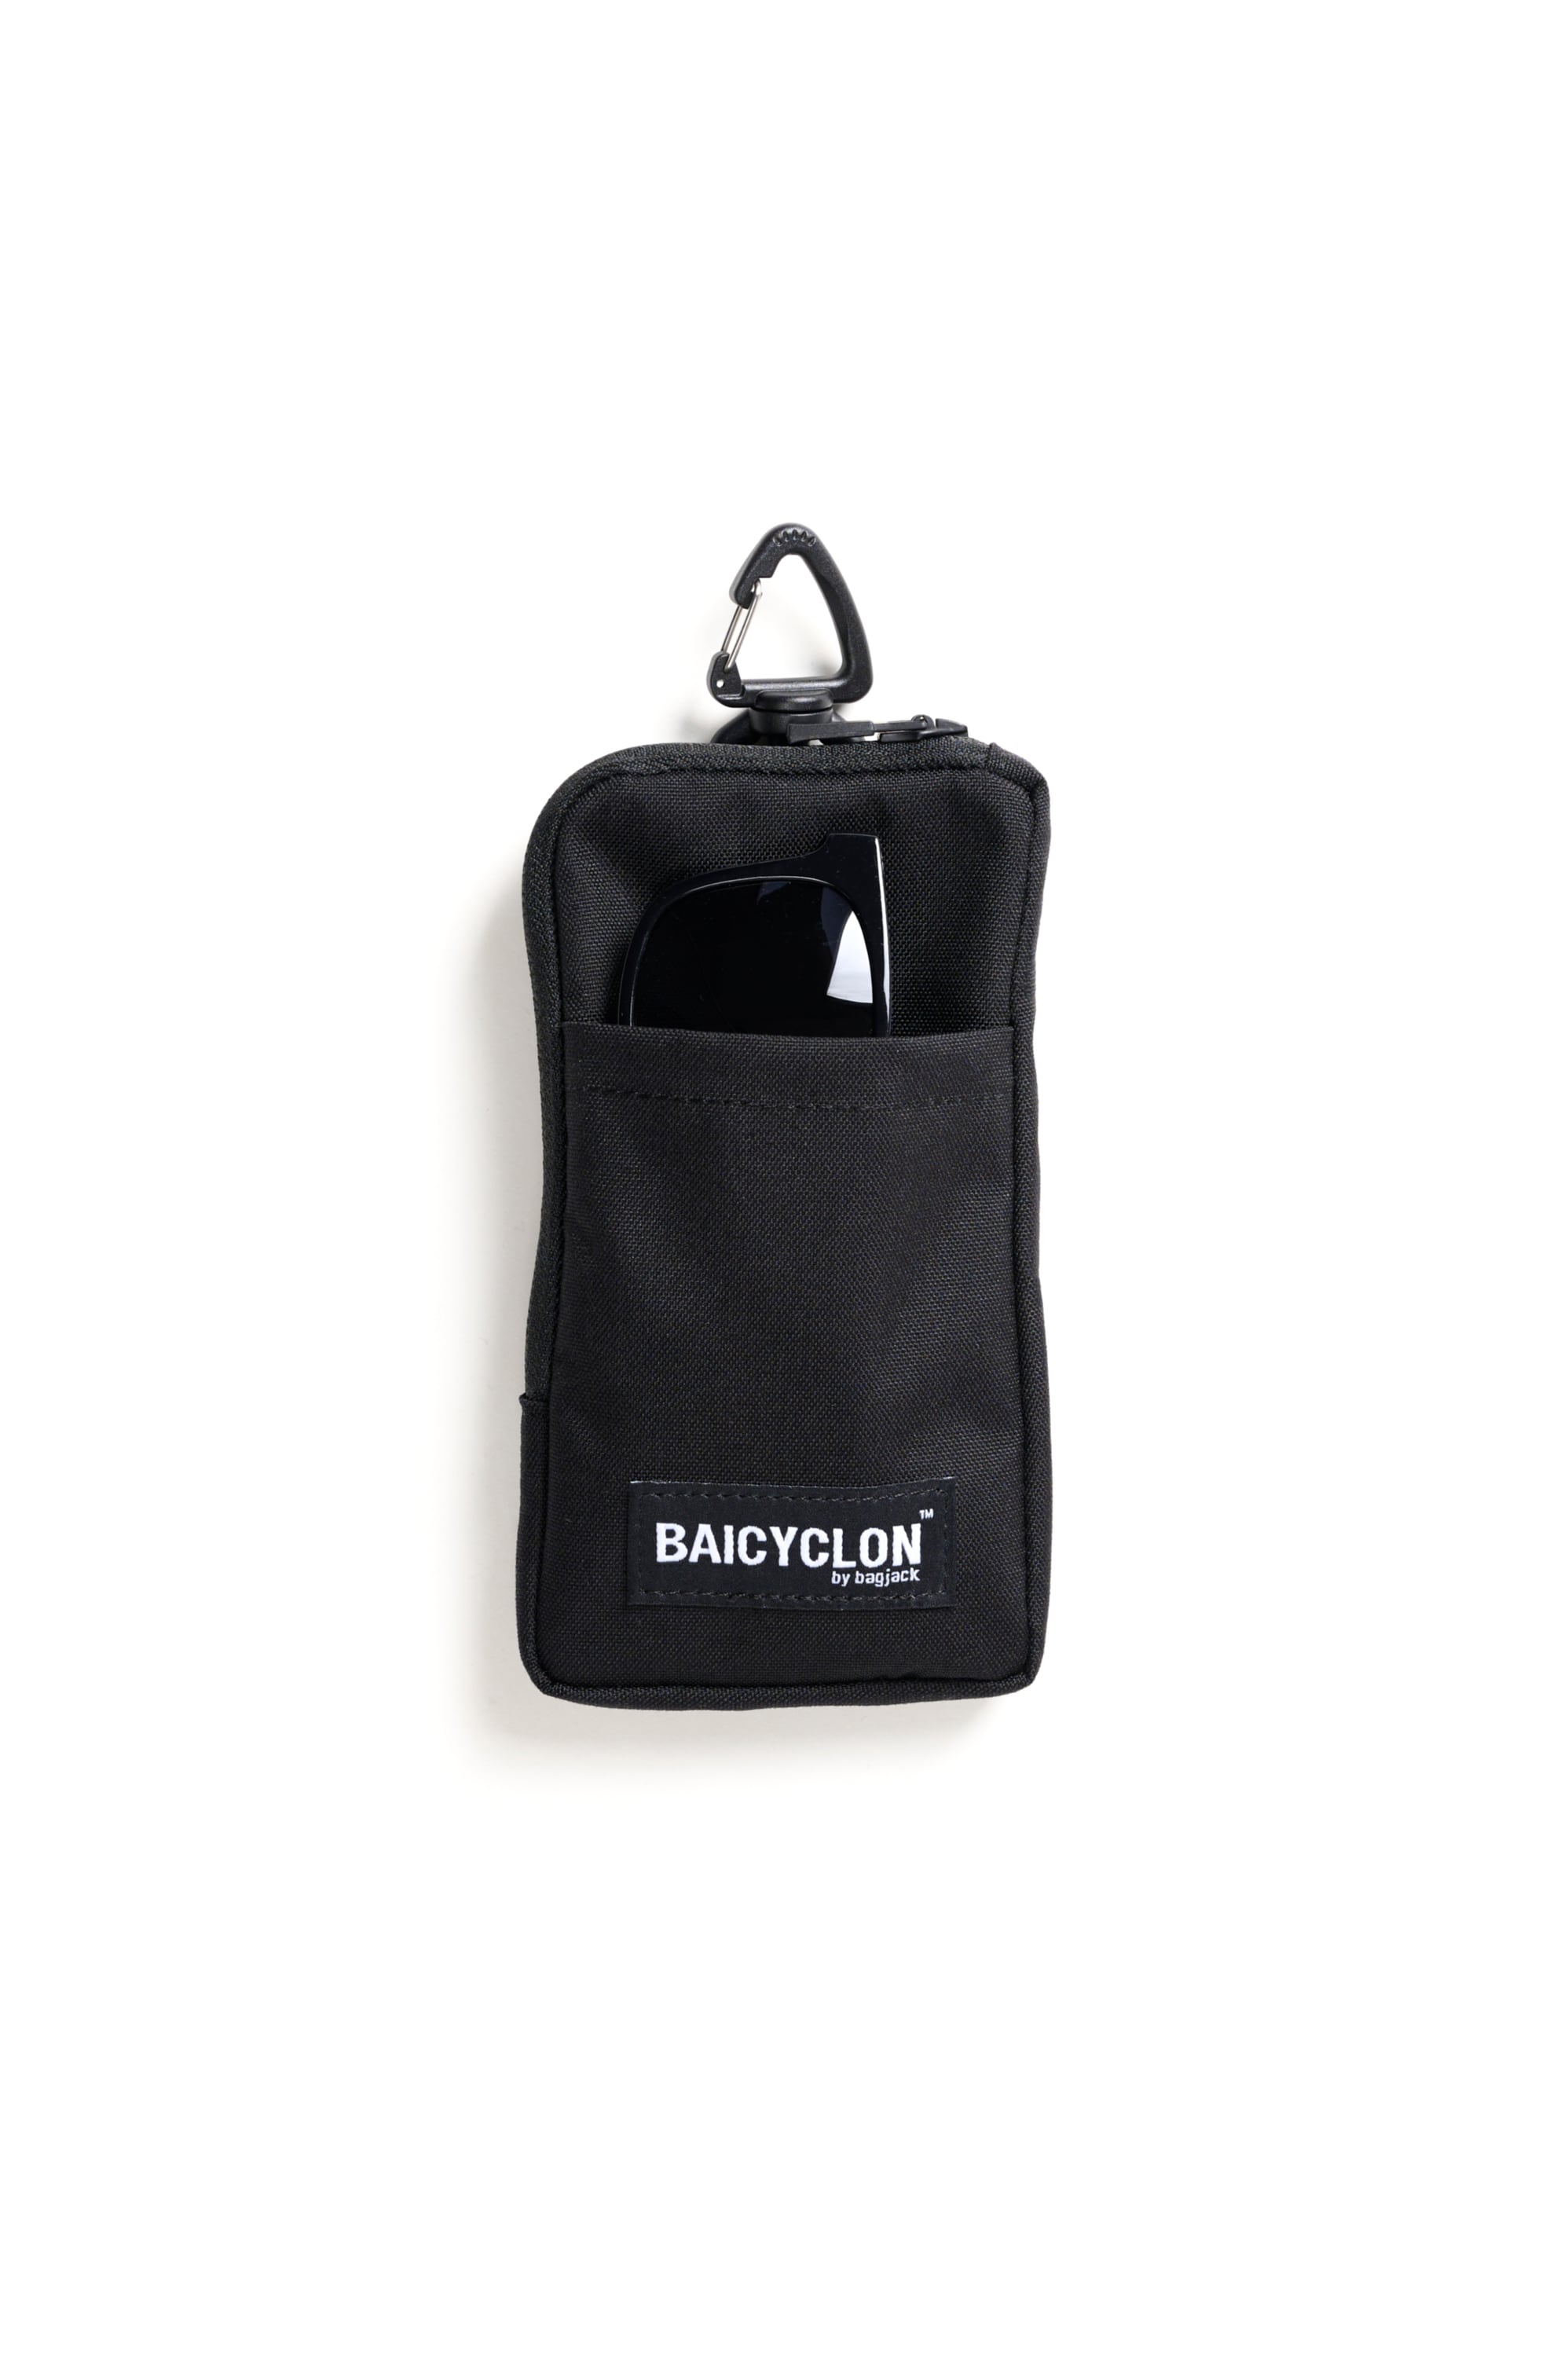 NEW - CORE LINE - COMBO SHOULDER - CL-04 | BAICYCLON by bagjack powered by  BASE